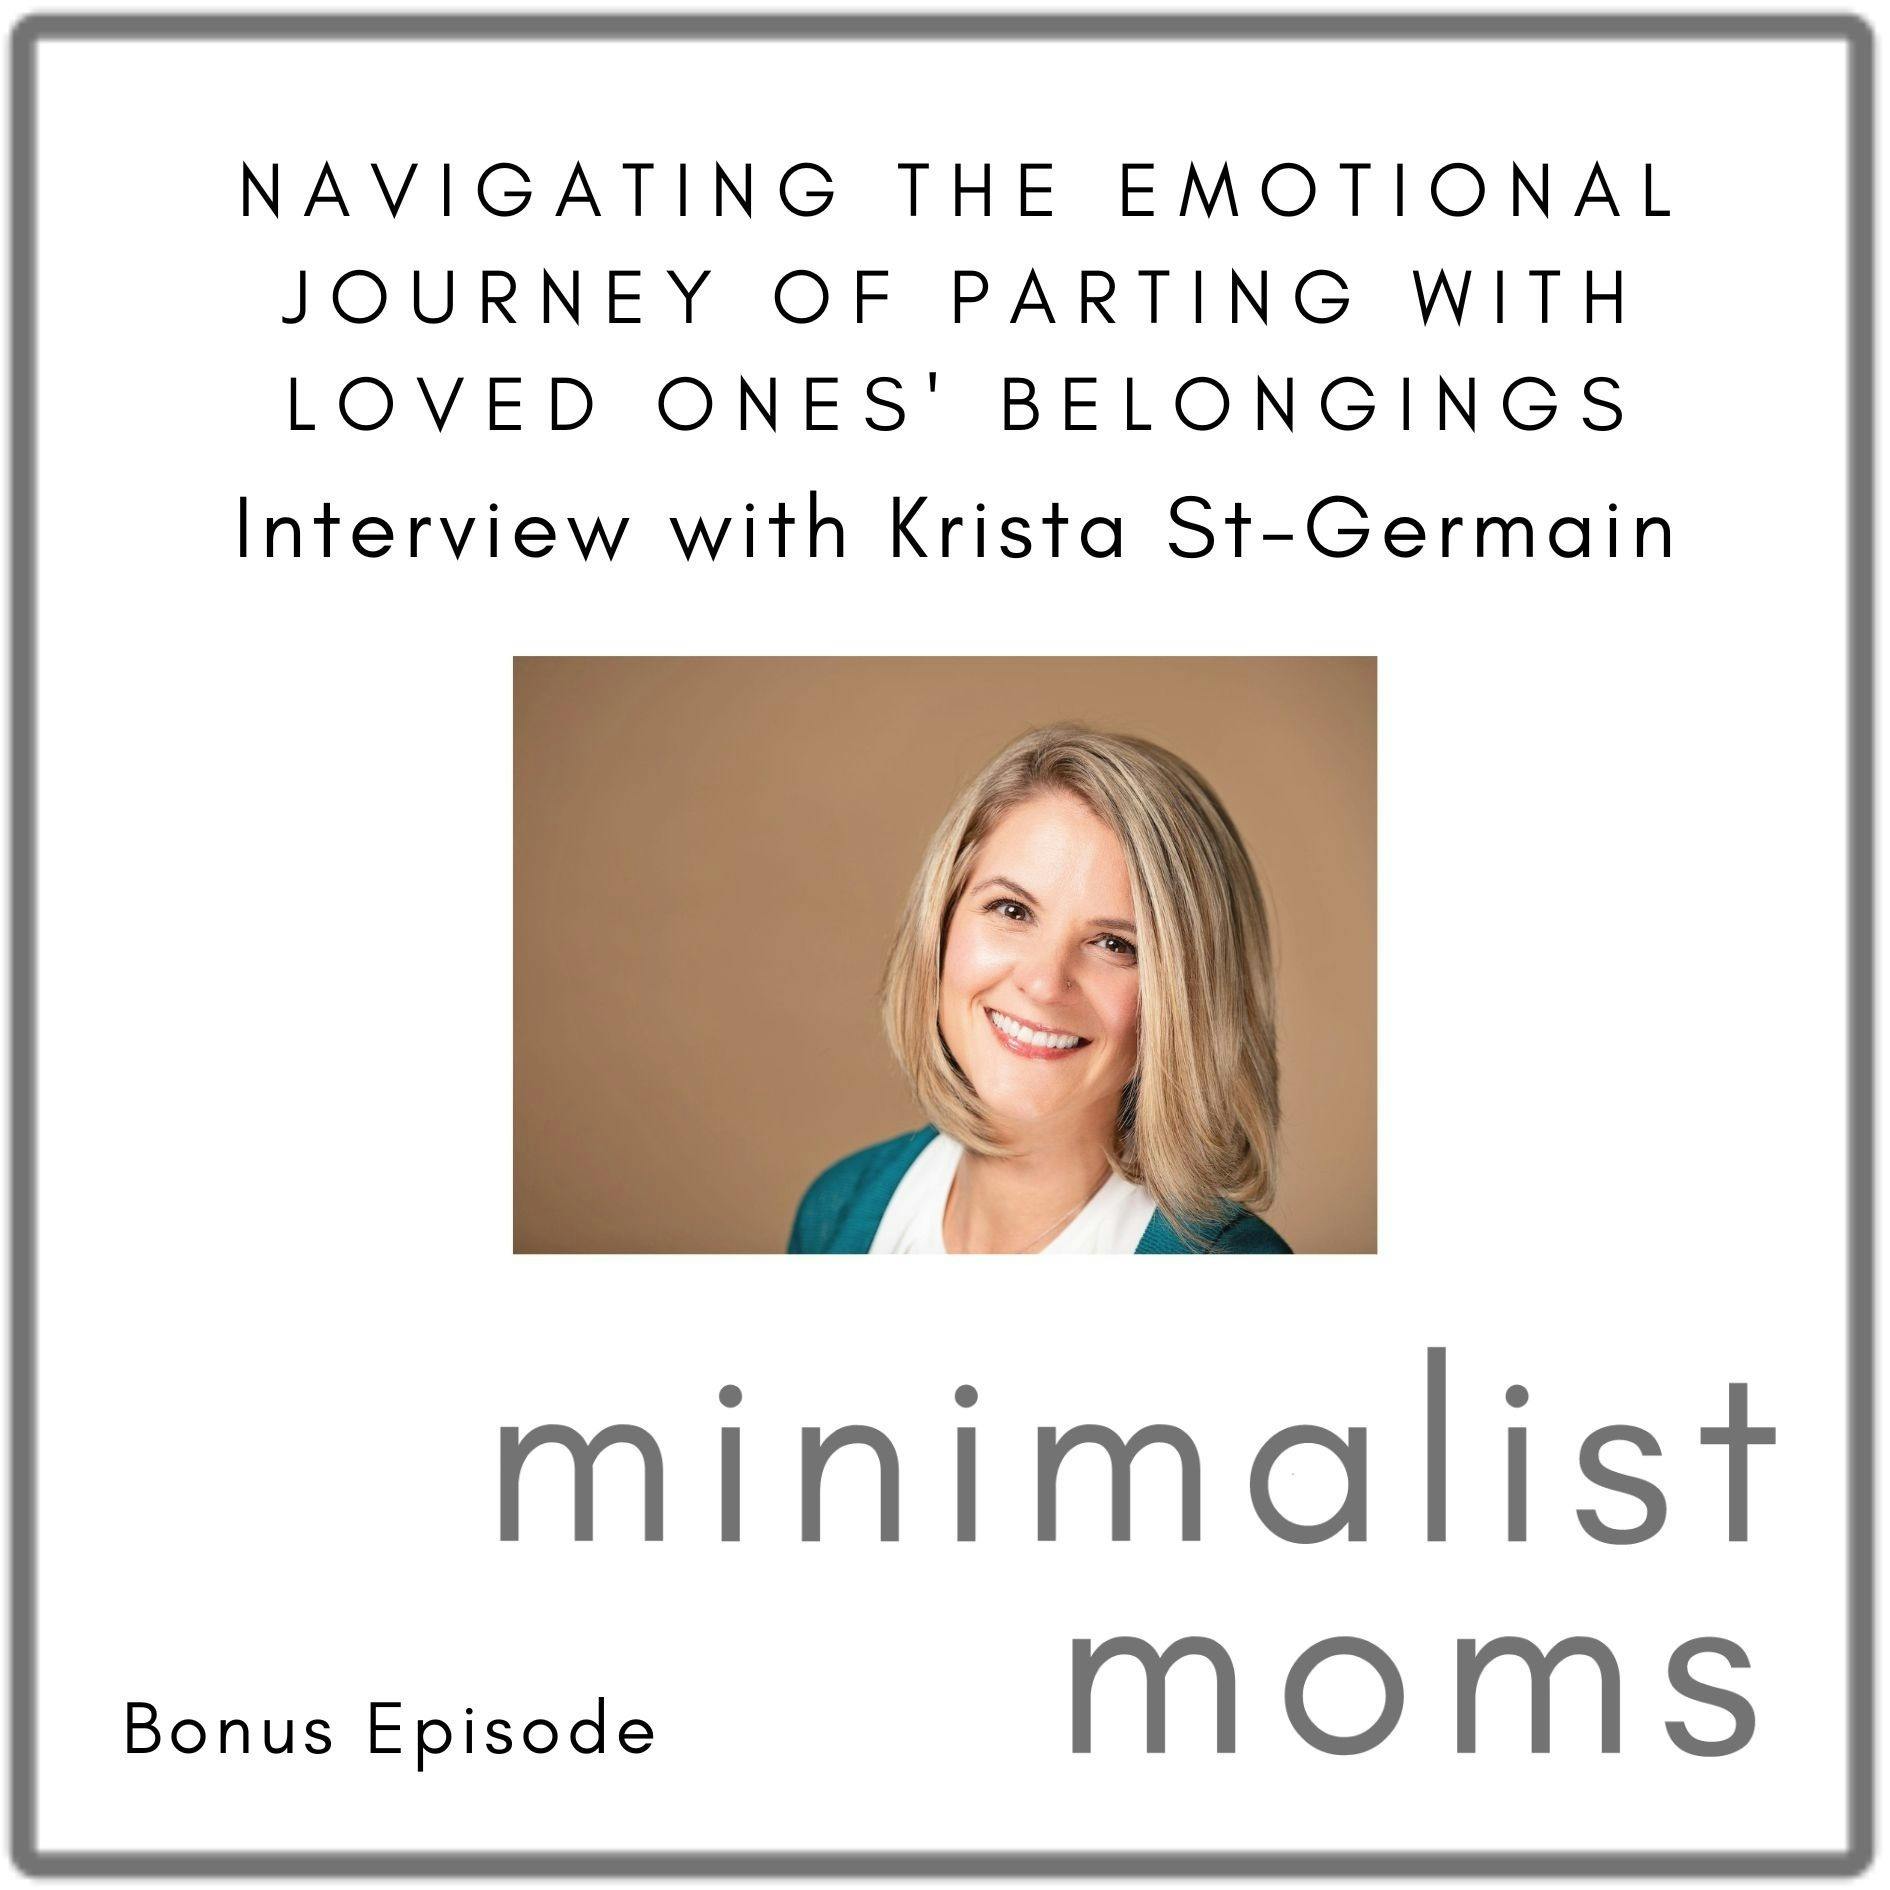 Navigating the Emotional Journey of Parting with Loved Ones’ Belongings with Krista St-Germain (Bonus Episode)